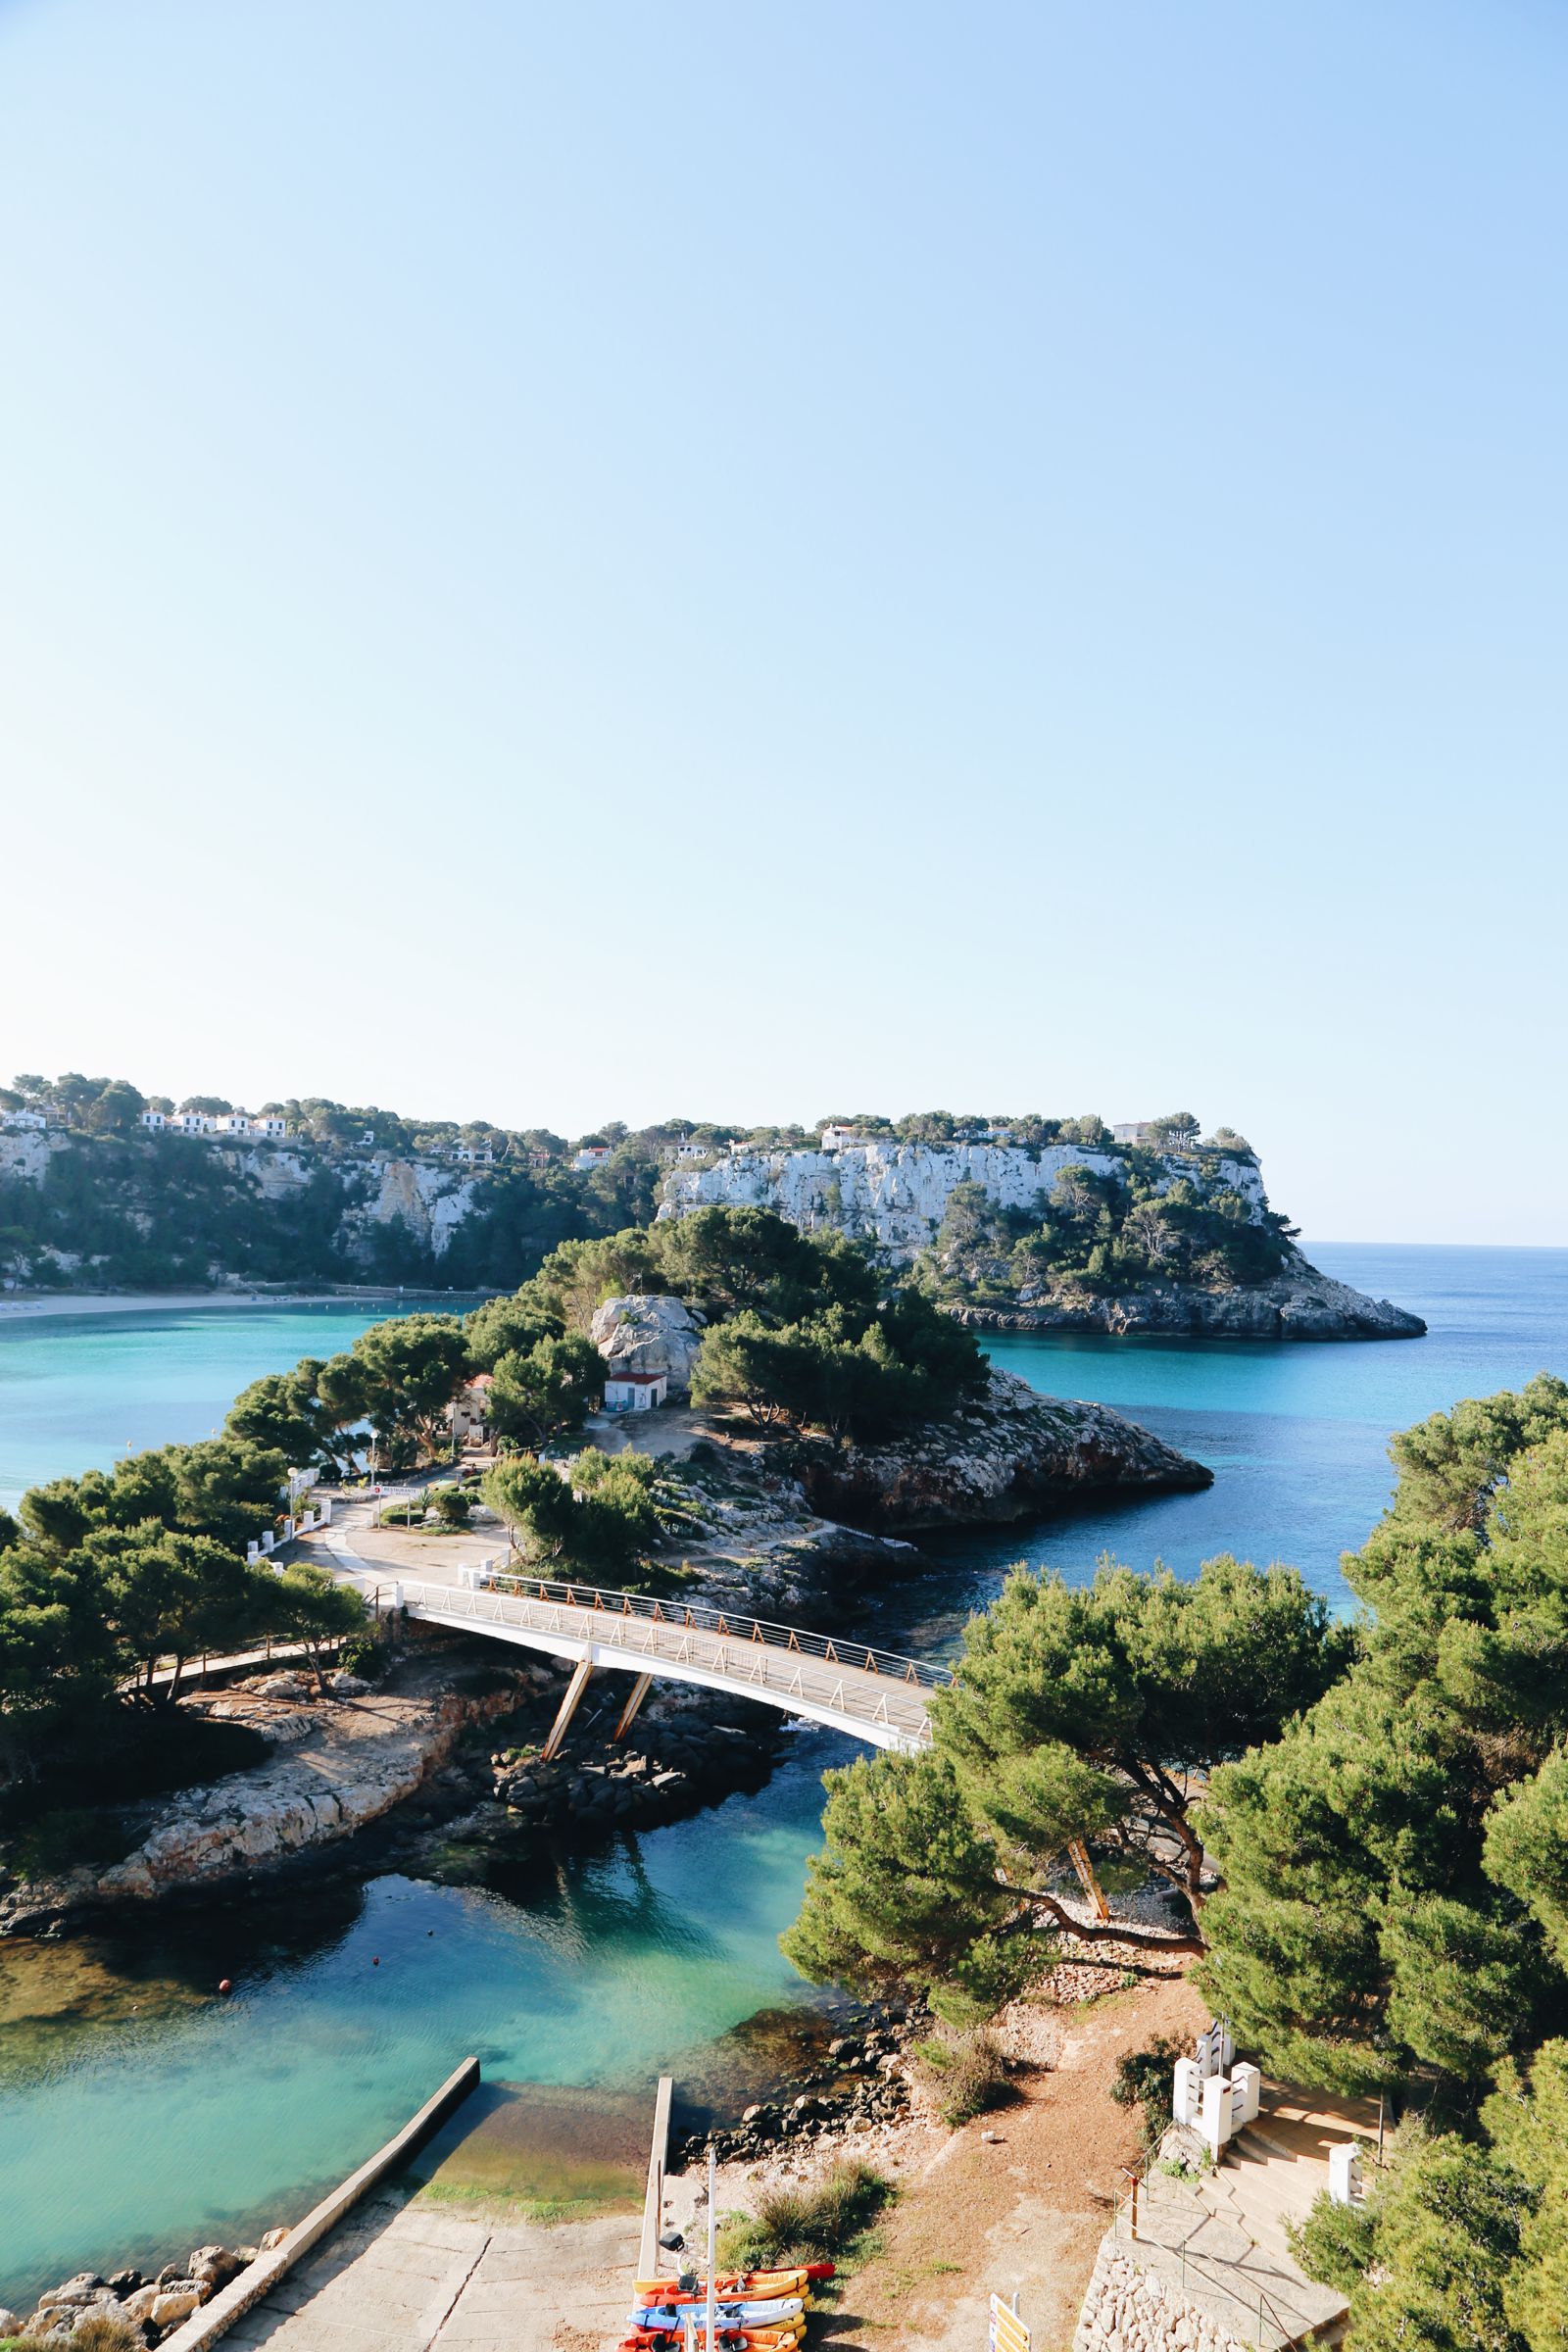 Ever Wondered What The Spanish Island Of Menorca Looks Like? Well Here It is... (1)